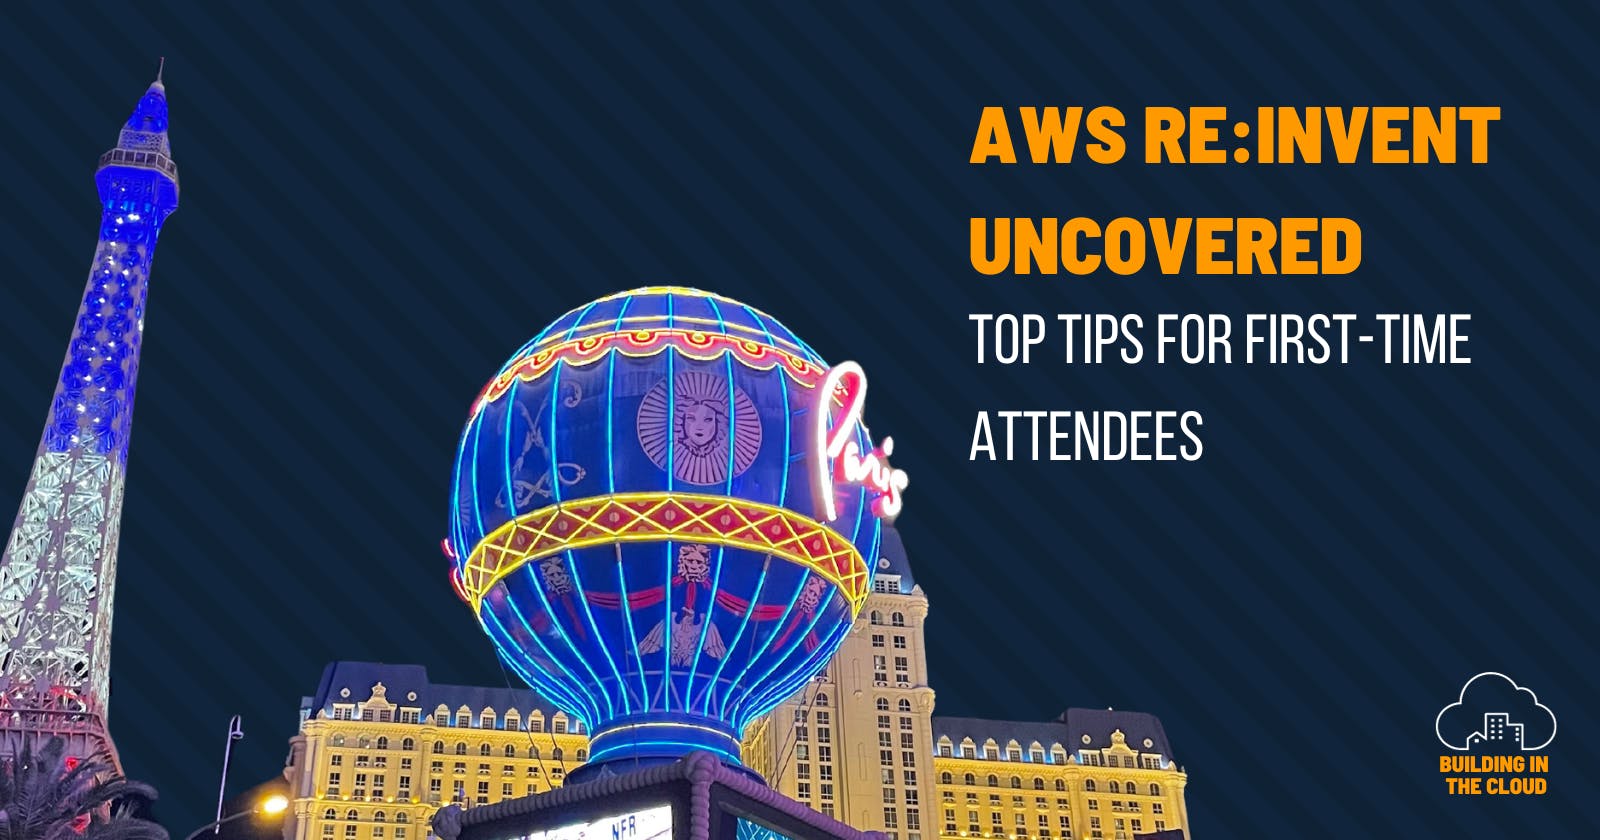 AWS re:Invent uncovered